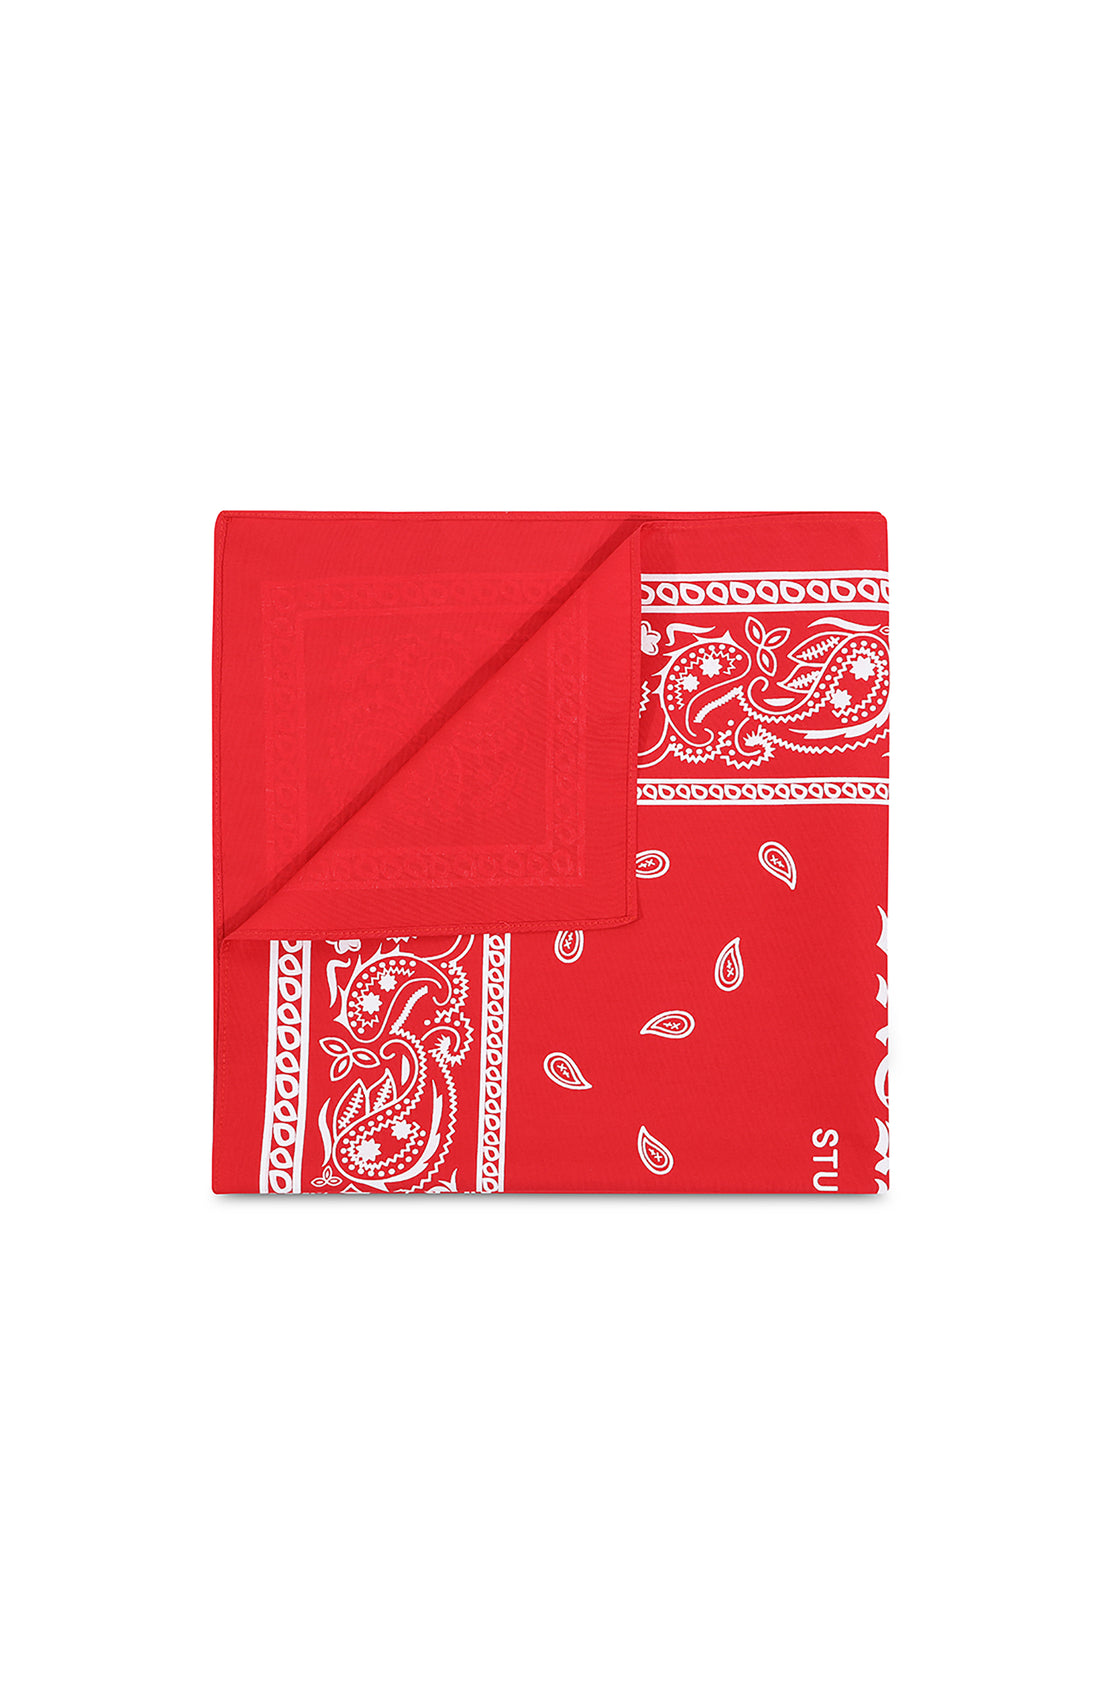 Premium bandana featuring a bold white graphic print. Expertly crafted in Portugal. Located in Dubai. 